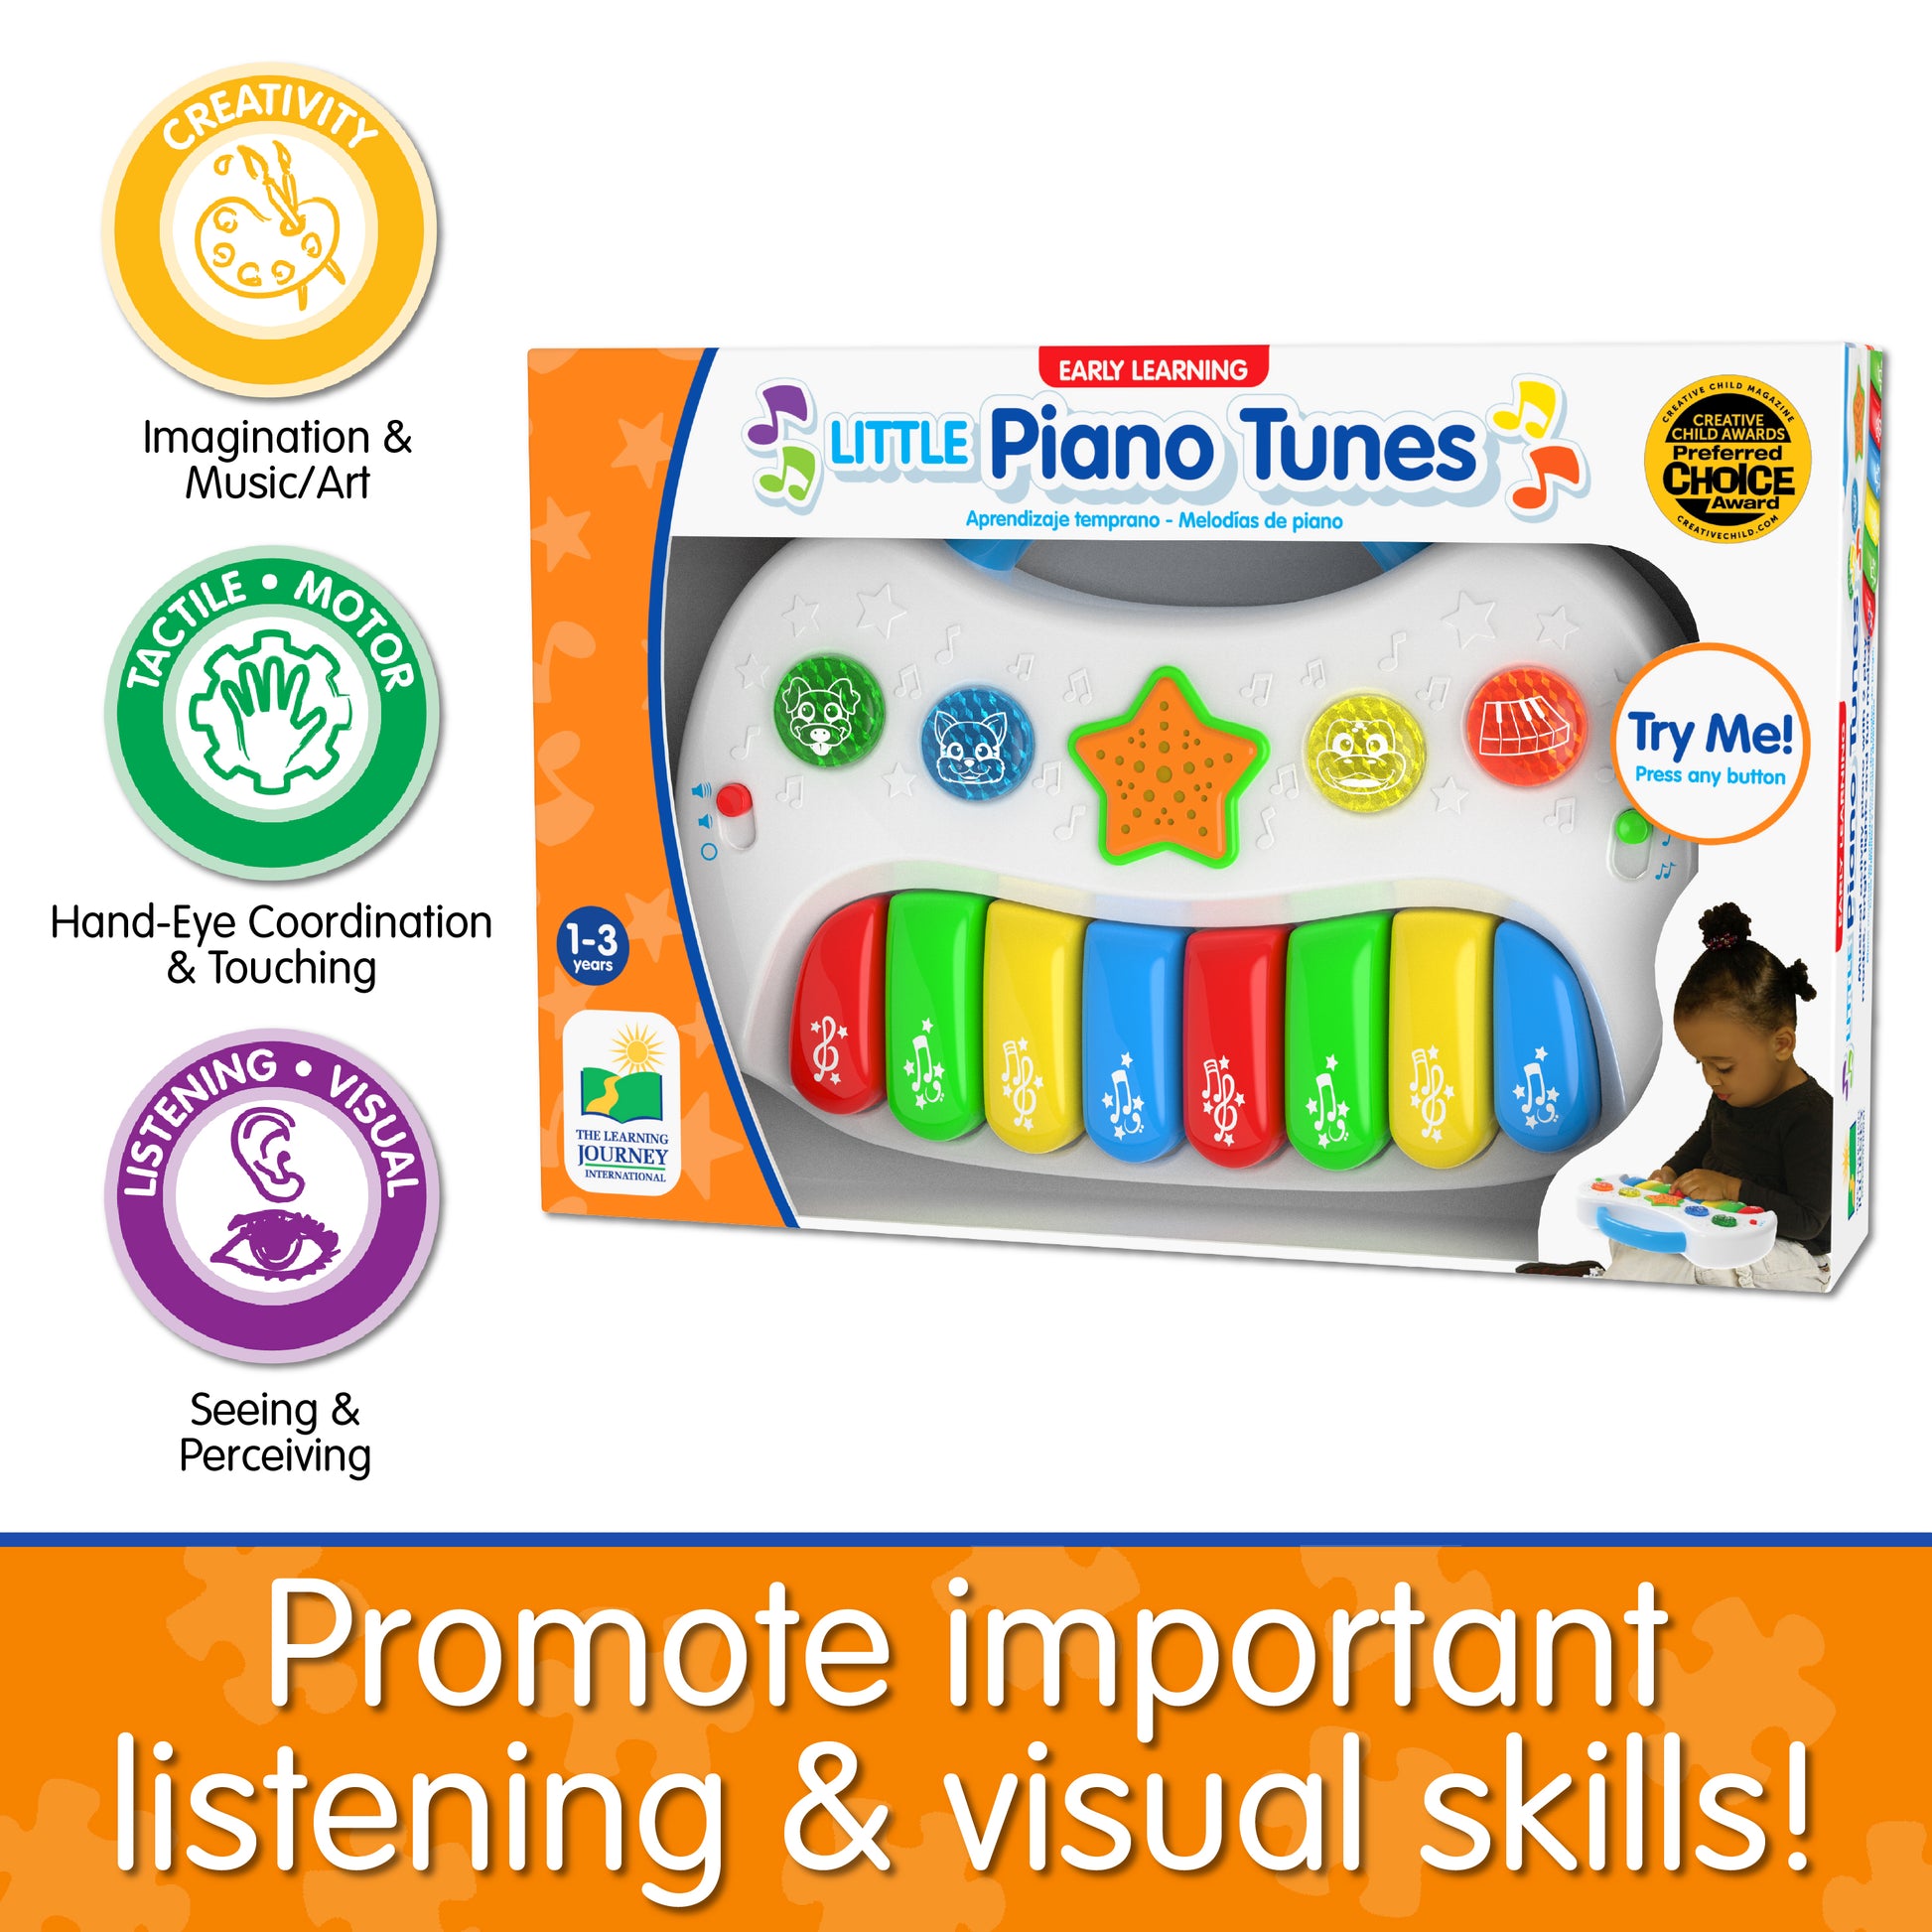 Infographic of Little Piano Tunes' educational benefits that says, "Promote important listening and visual skills!"